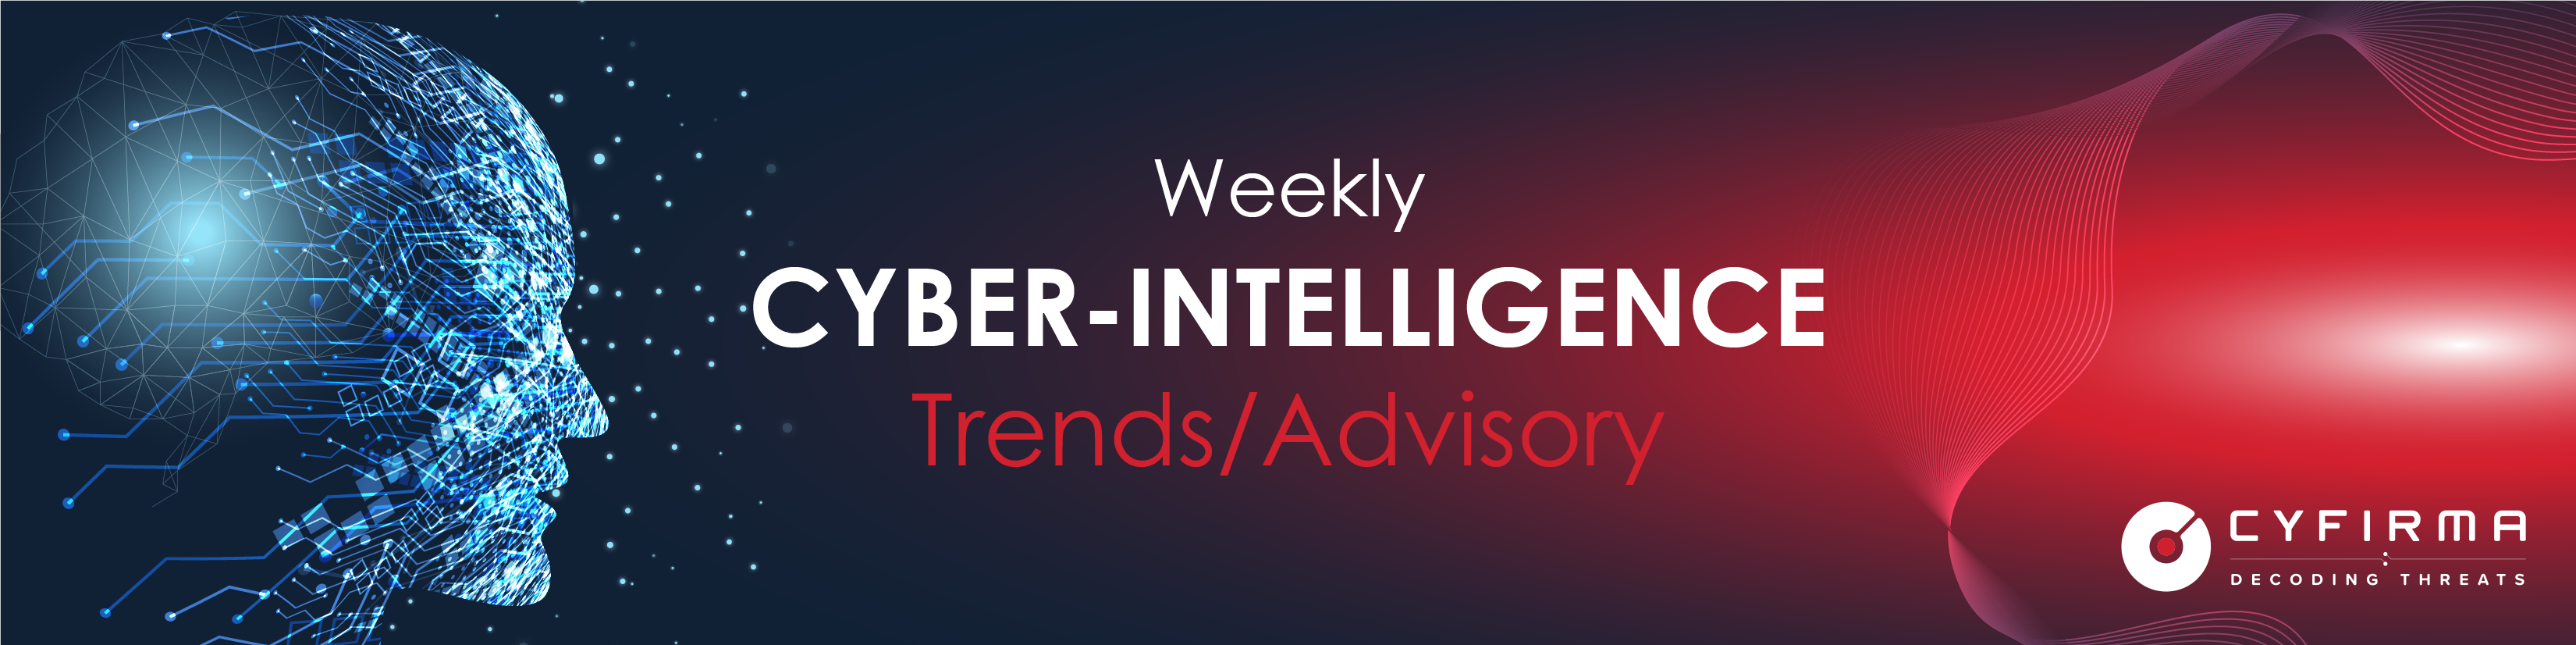 Weekly Cyber-Intelligence Trends and Advisory – 1 Apr 2022